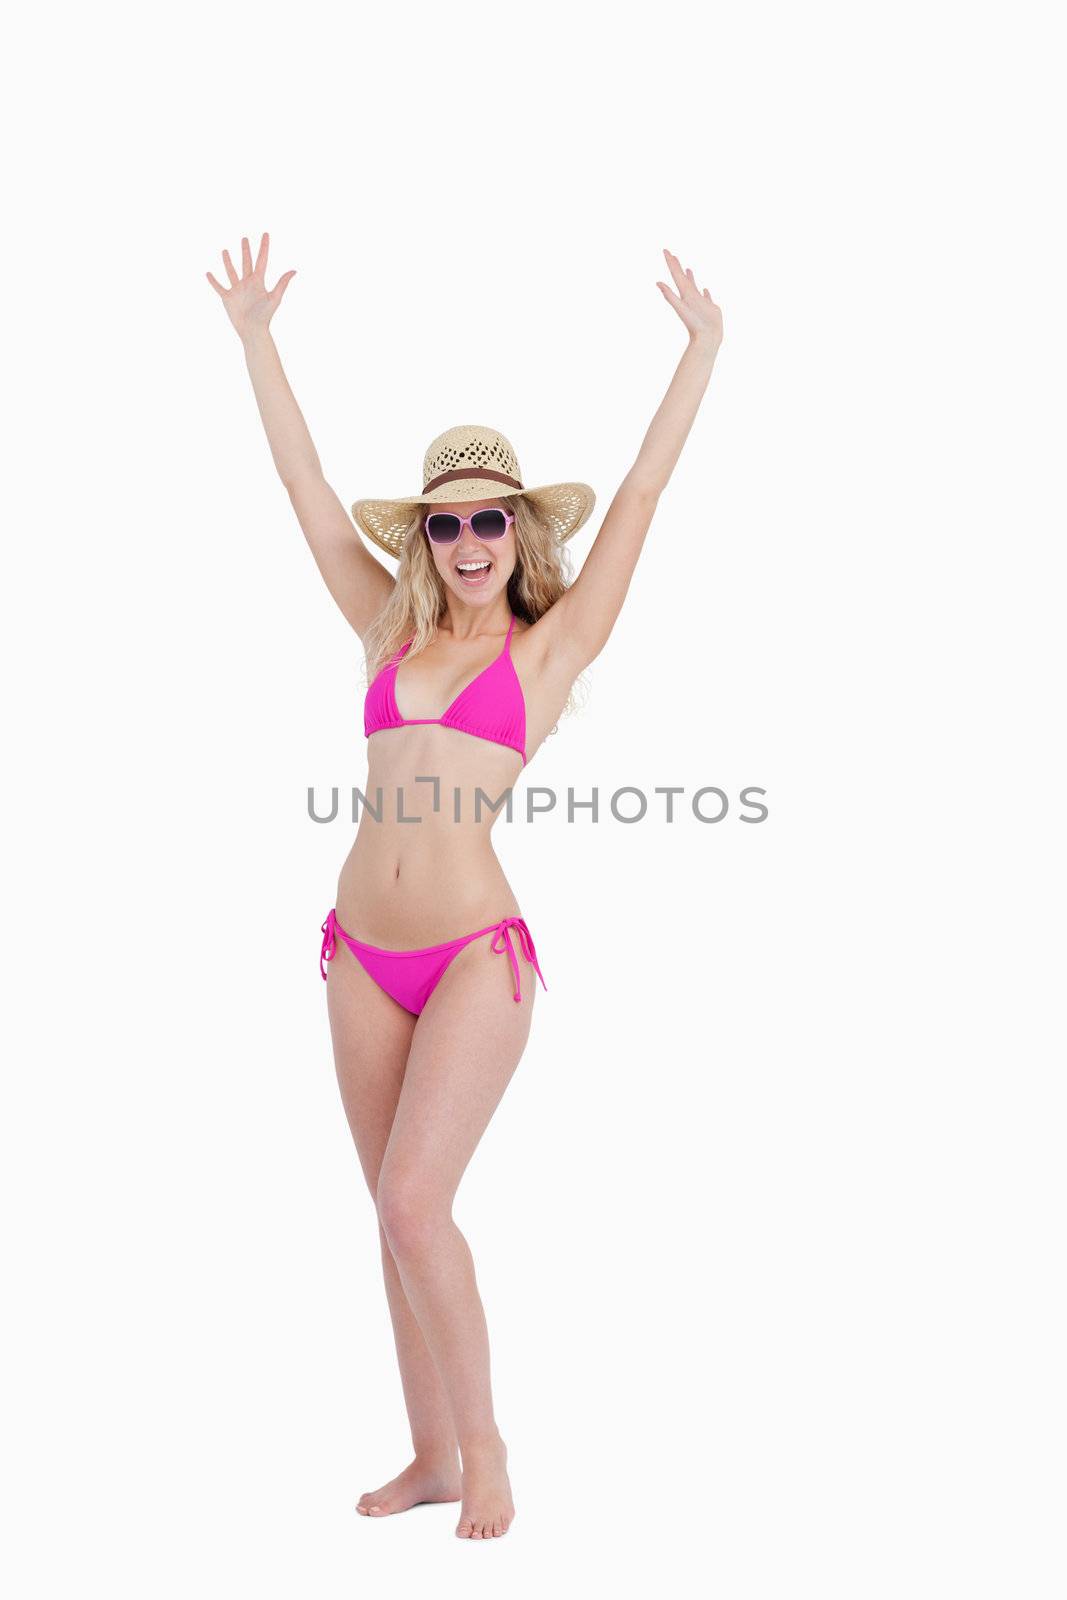 Teenager in a swimsuit raising her arms above the head against a white background